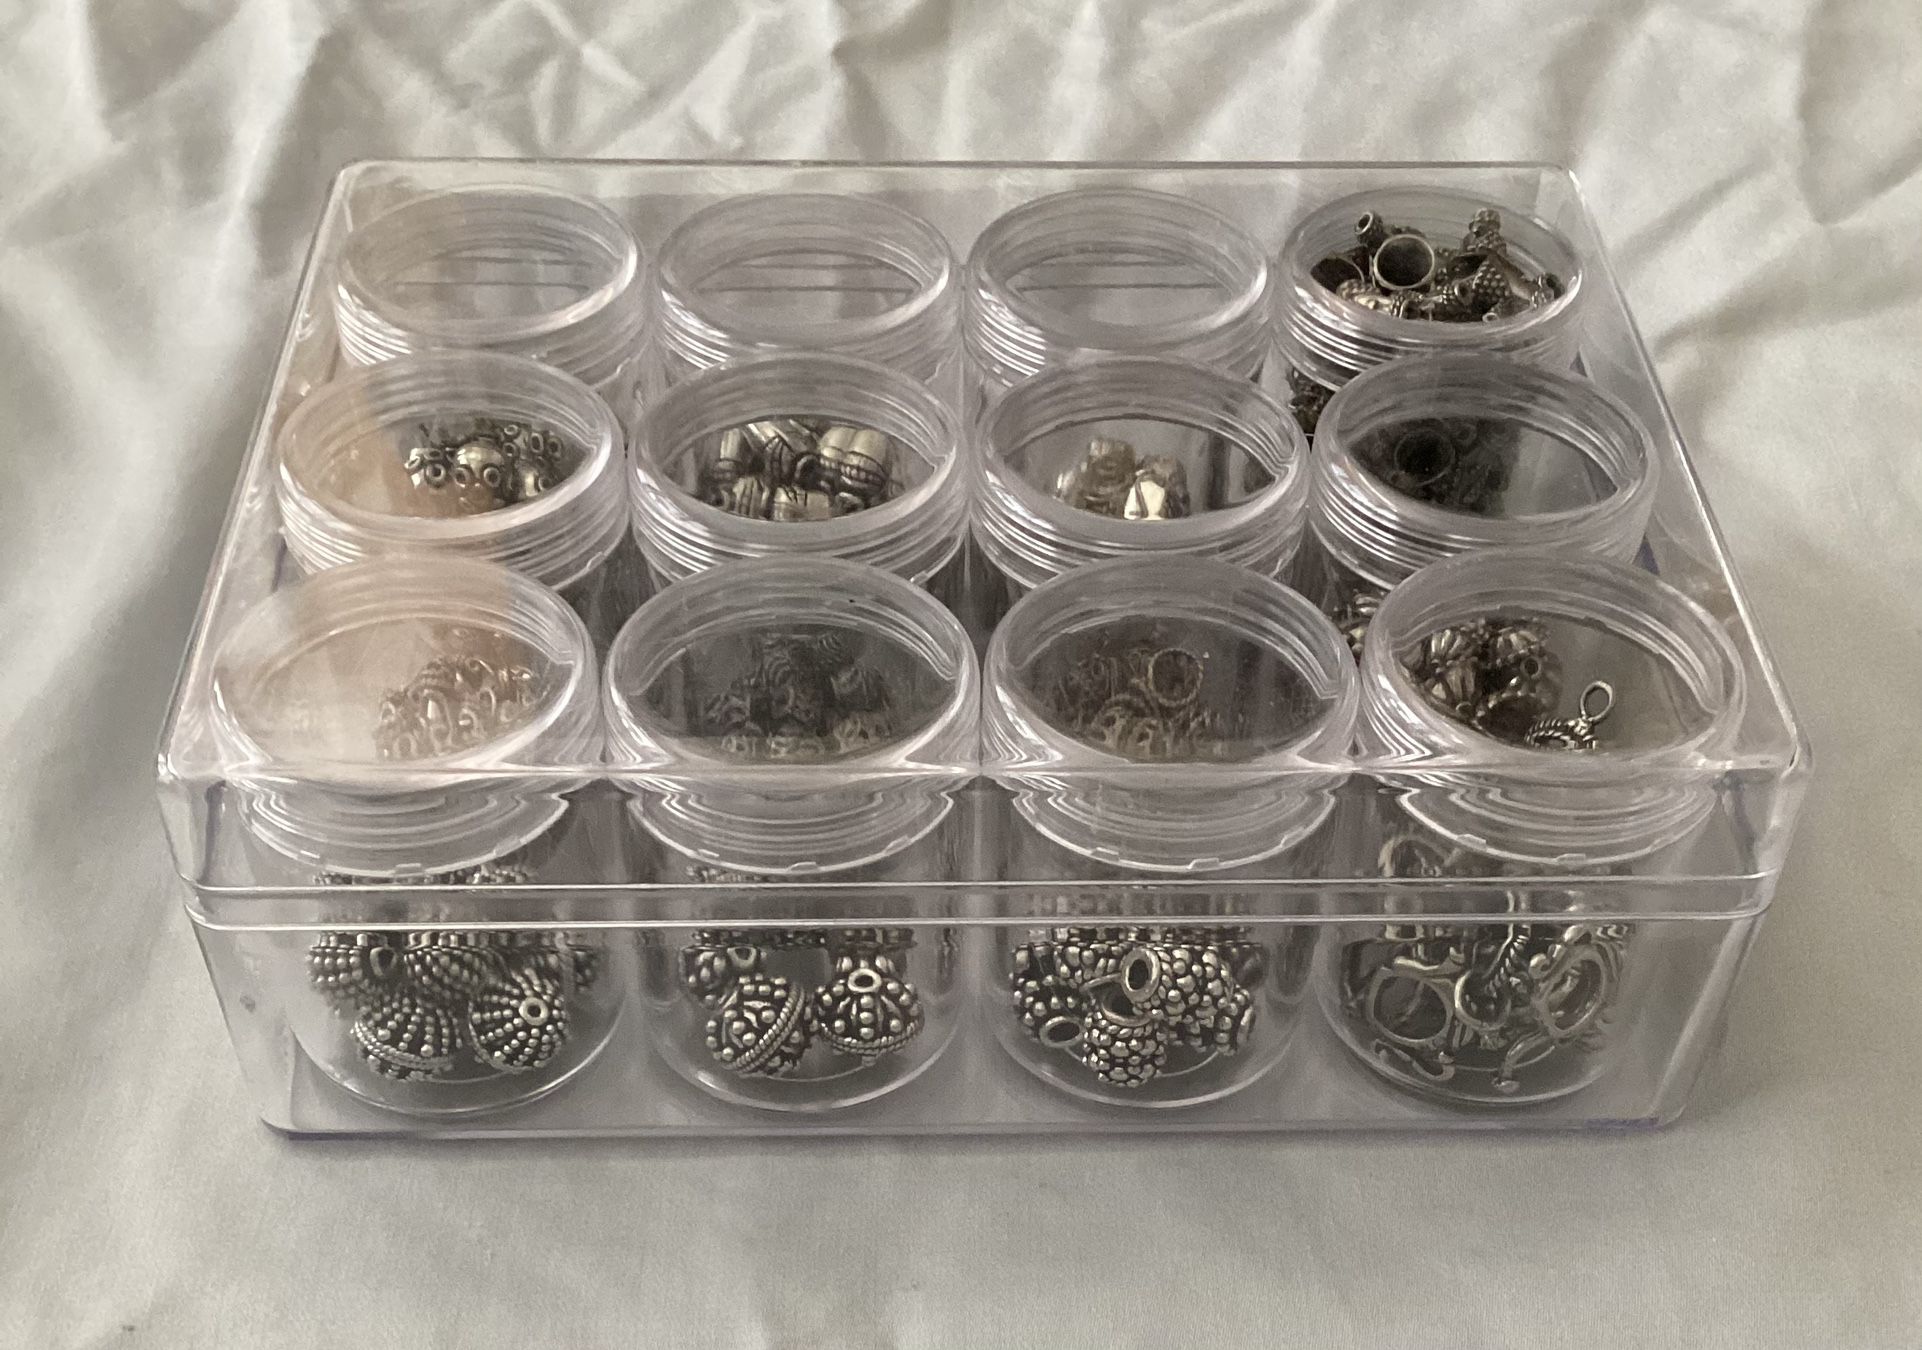 Jewelry Making Assorted Findings - Metal Beads And Necklace/Bracelet Latches In Containers 